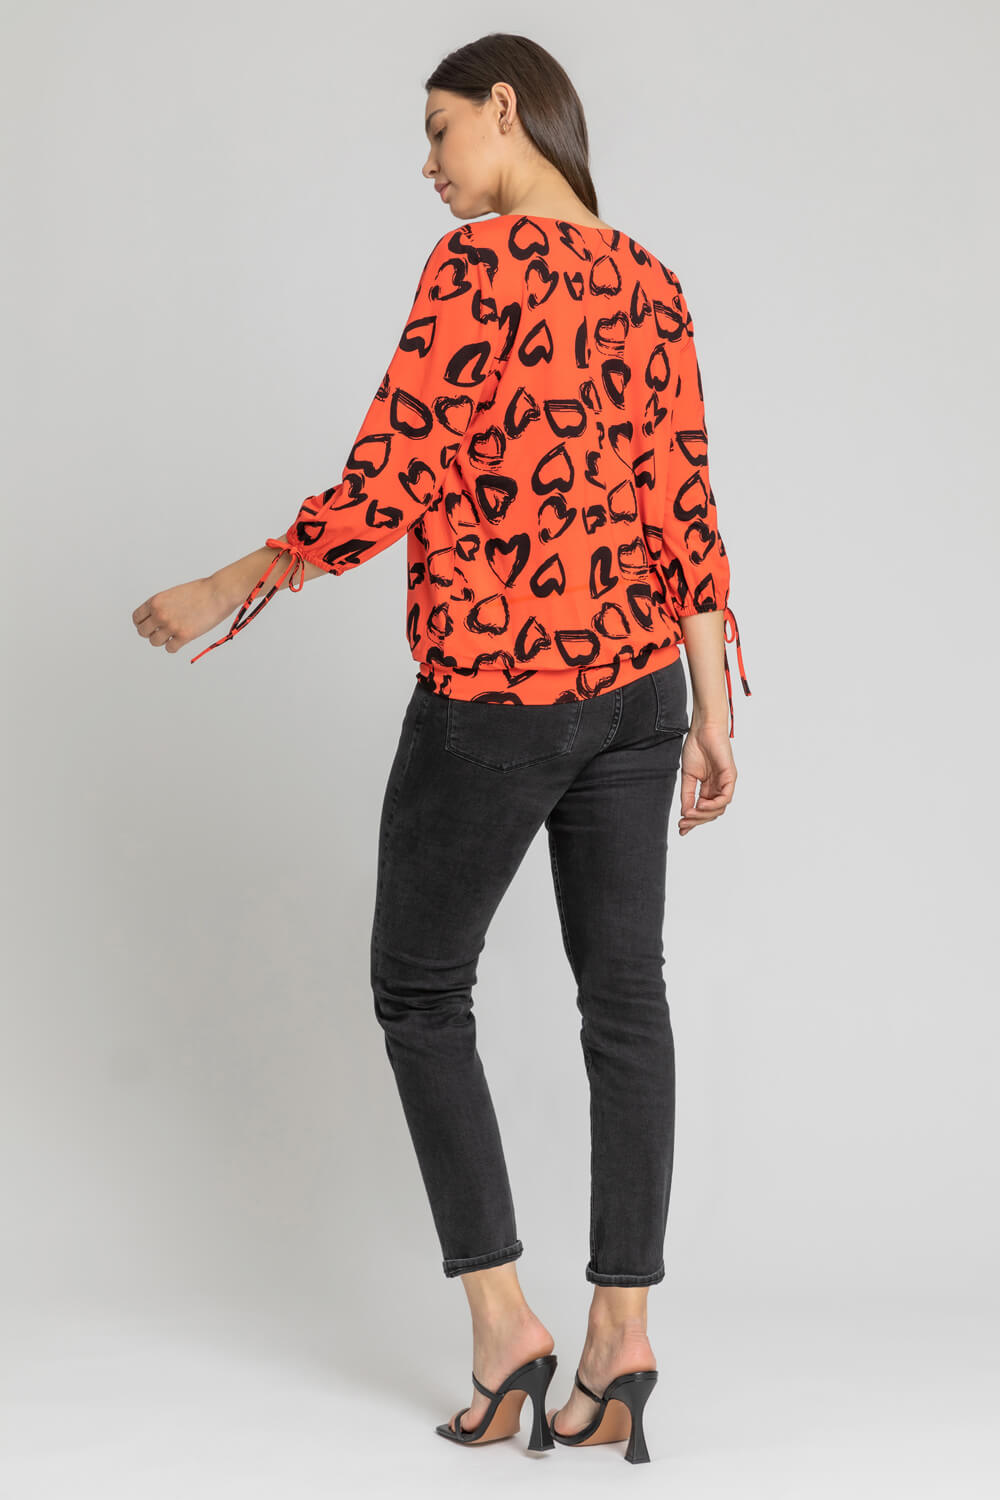 Red Heart Print Blouson Top, Image 2 of 4